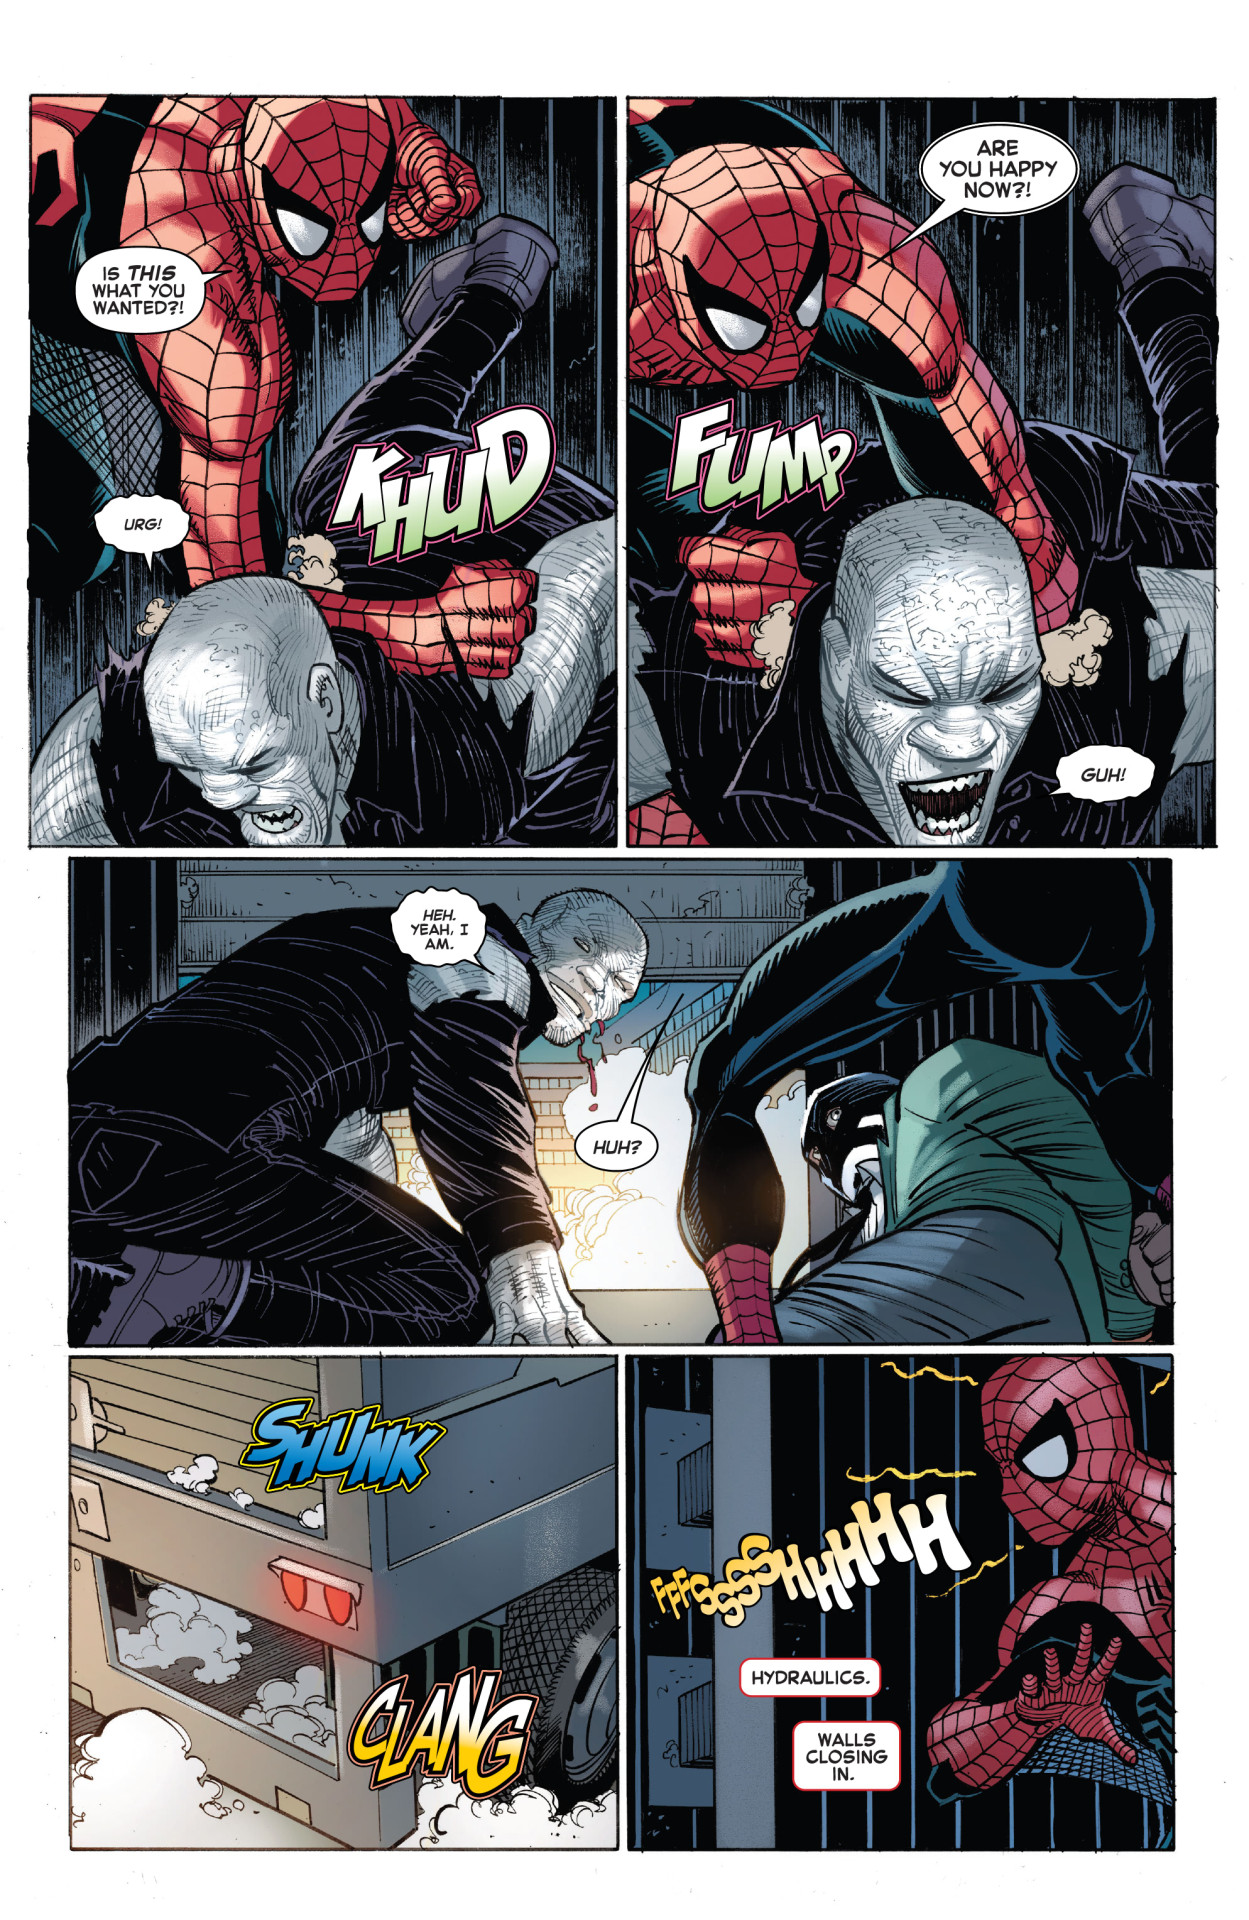 Spider-Man is fighting Tombstone inside the truck until he gets trapped, beaten up and squeezed into unconsciousness. - Amazing Spider-Man v6 #2, 2022 #Spider Man#Spiderman#Peter Parker#spidey #peter benjamin parker #Tombstone#Lonnie Lincoln#lured #beaten. #squeezed #trapped. #defeated #Dude in Distress